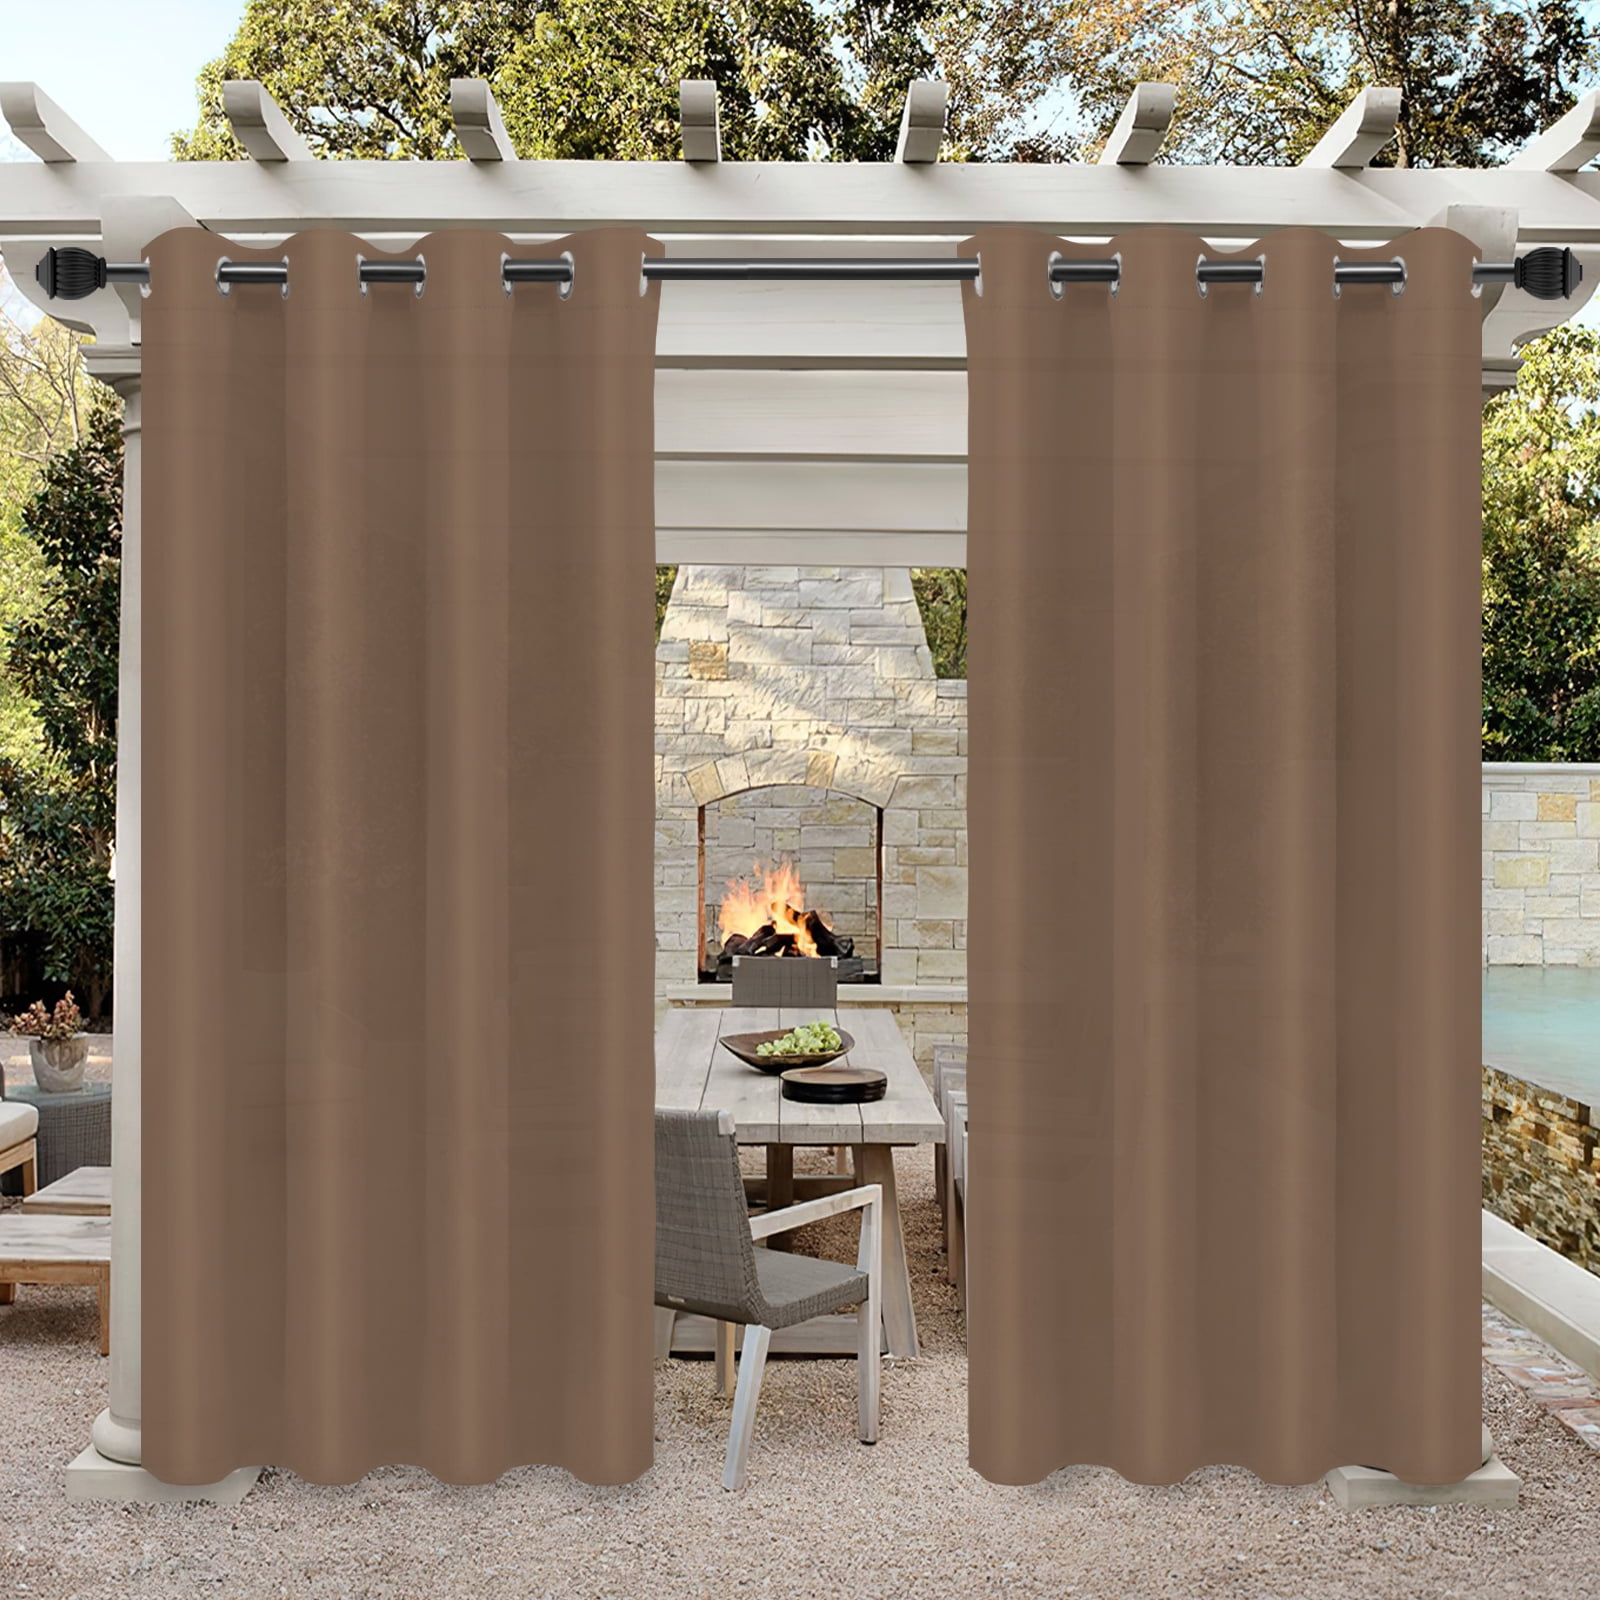 Cross Land Outdoor Curtains UV Protection Thermal Insulated Blackout for Patio,Garden,Chocolate,54x 96